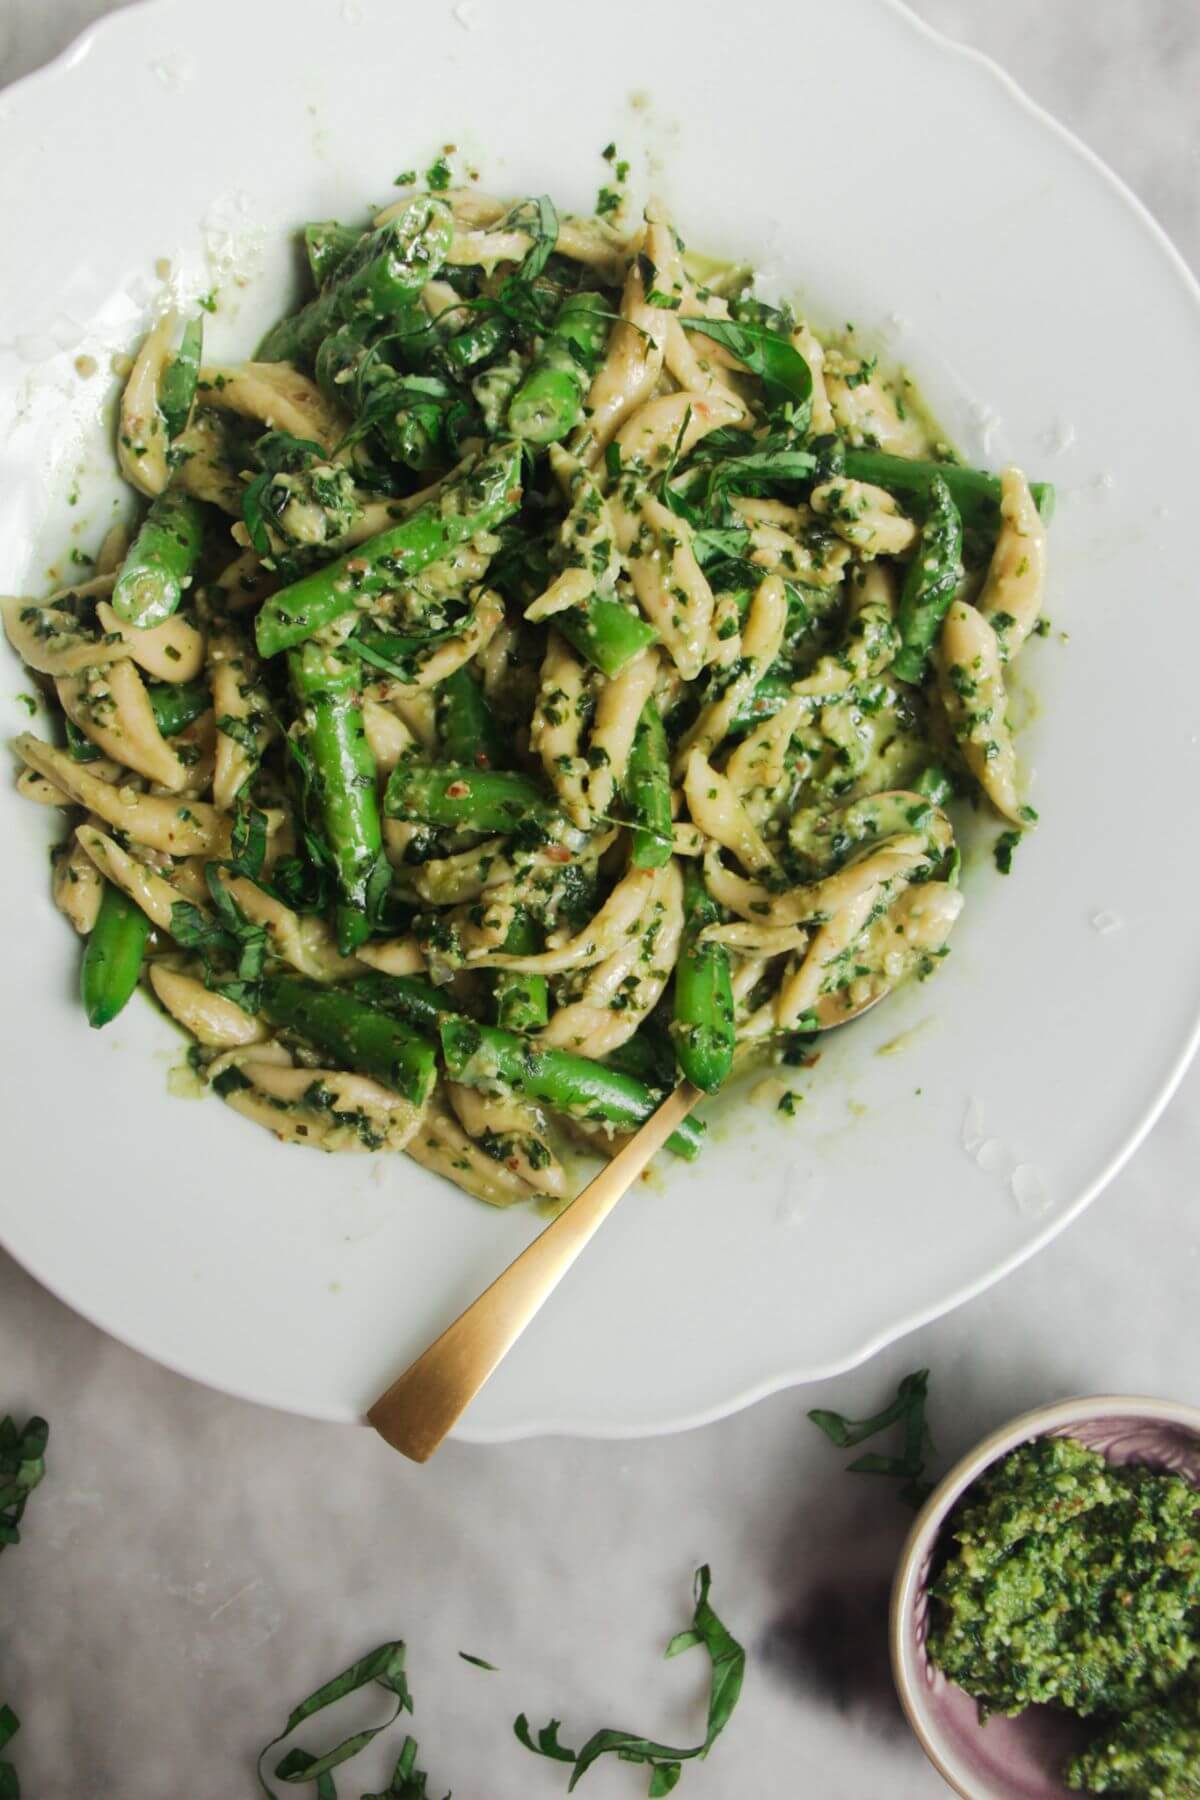 Pesto pasta with green beans in a scalloped plate with more pesto on the side.